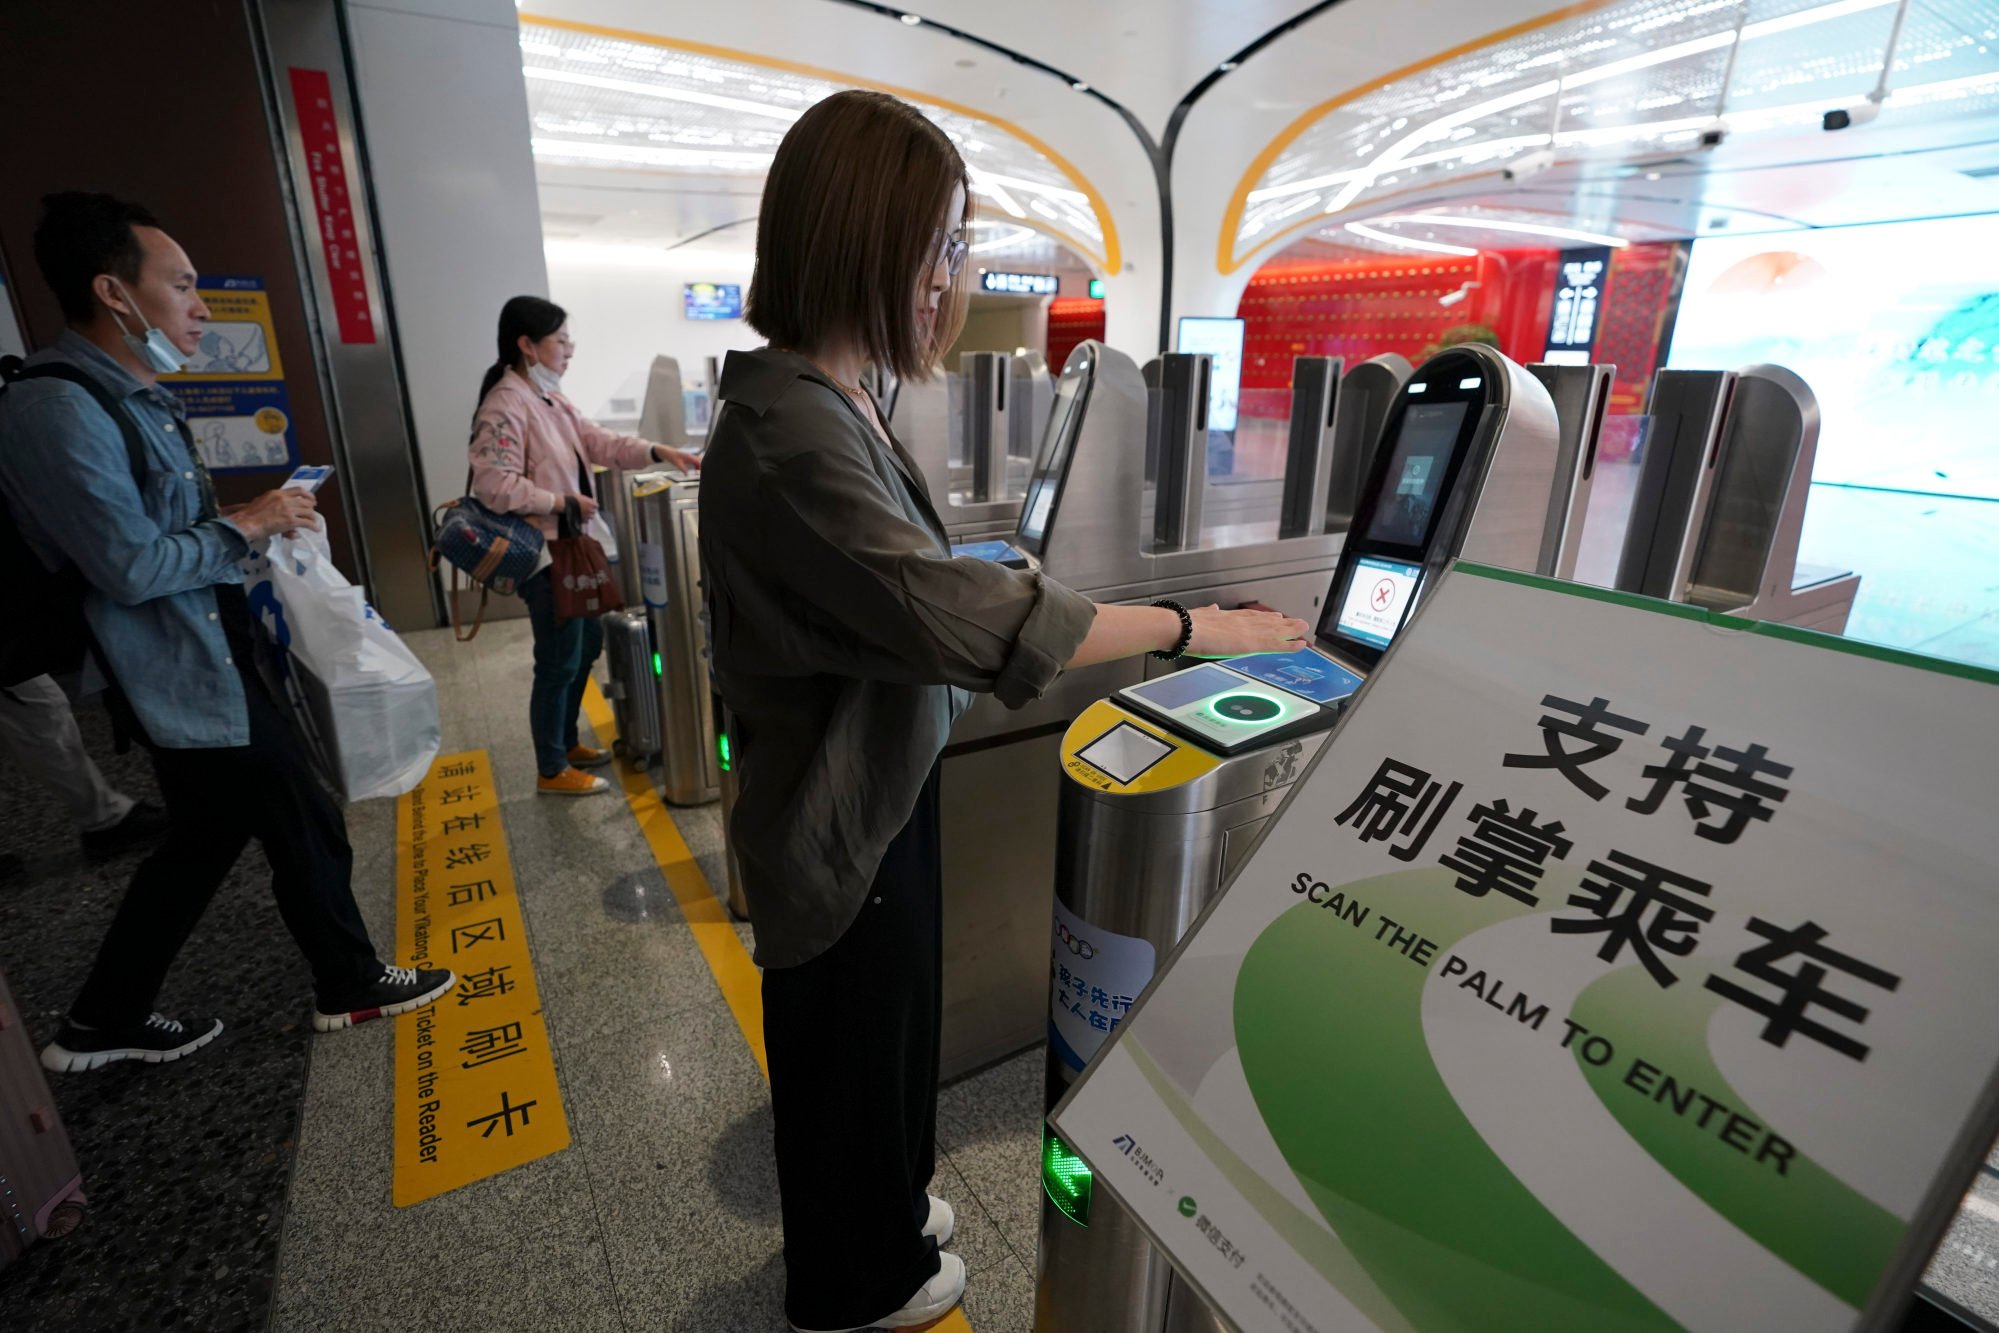 A passenger shows her palm to pass through a ticket gate at a station on the Daxing Airport Express, a Beijing subway line. Photo: Beijing Youth Daily/VCG via Getty Images